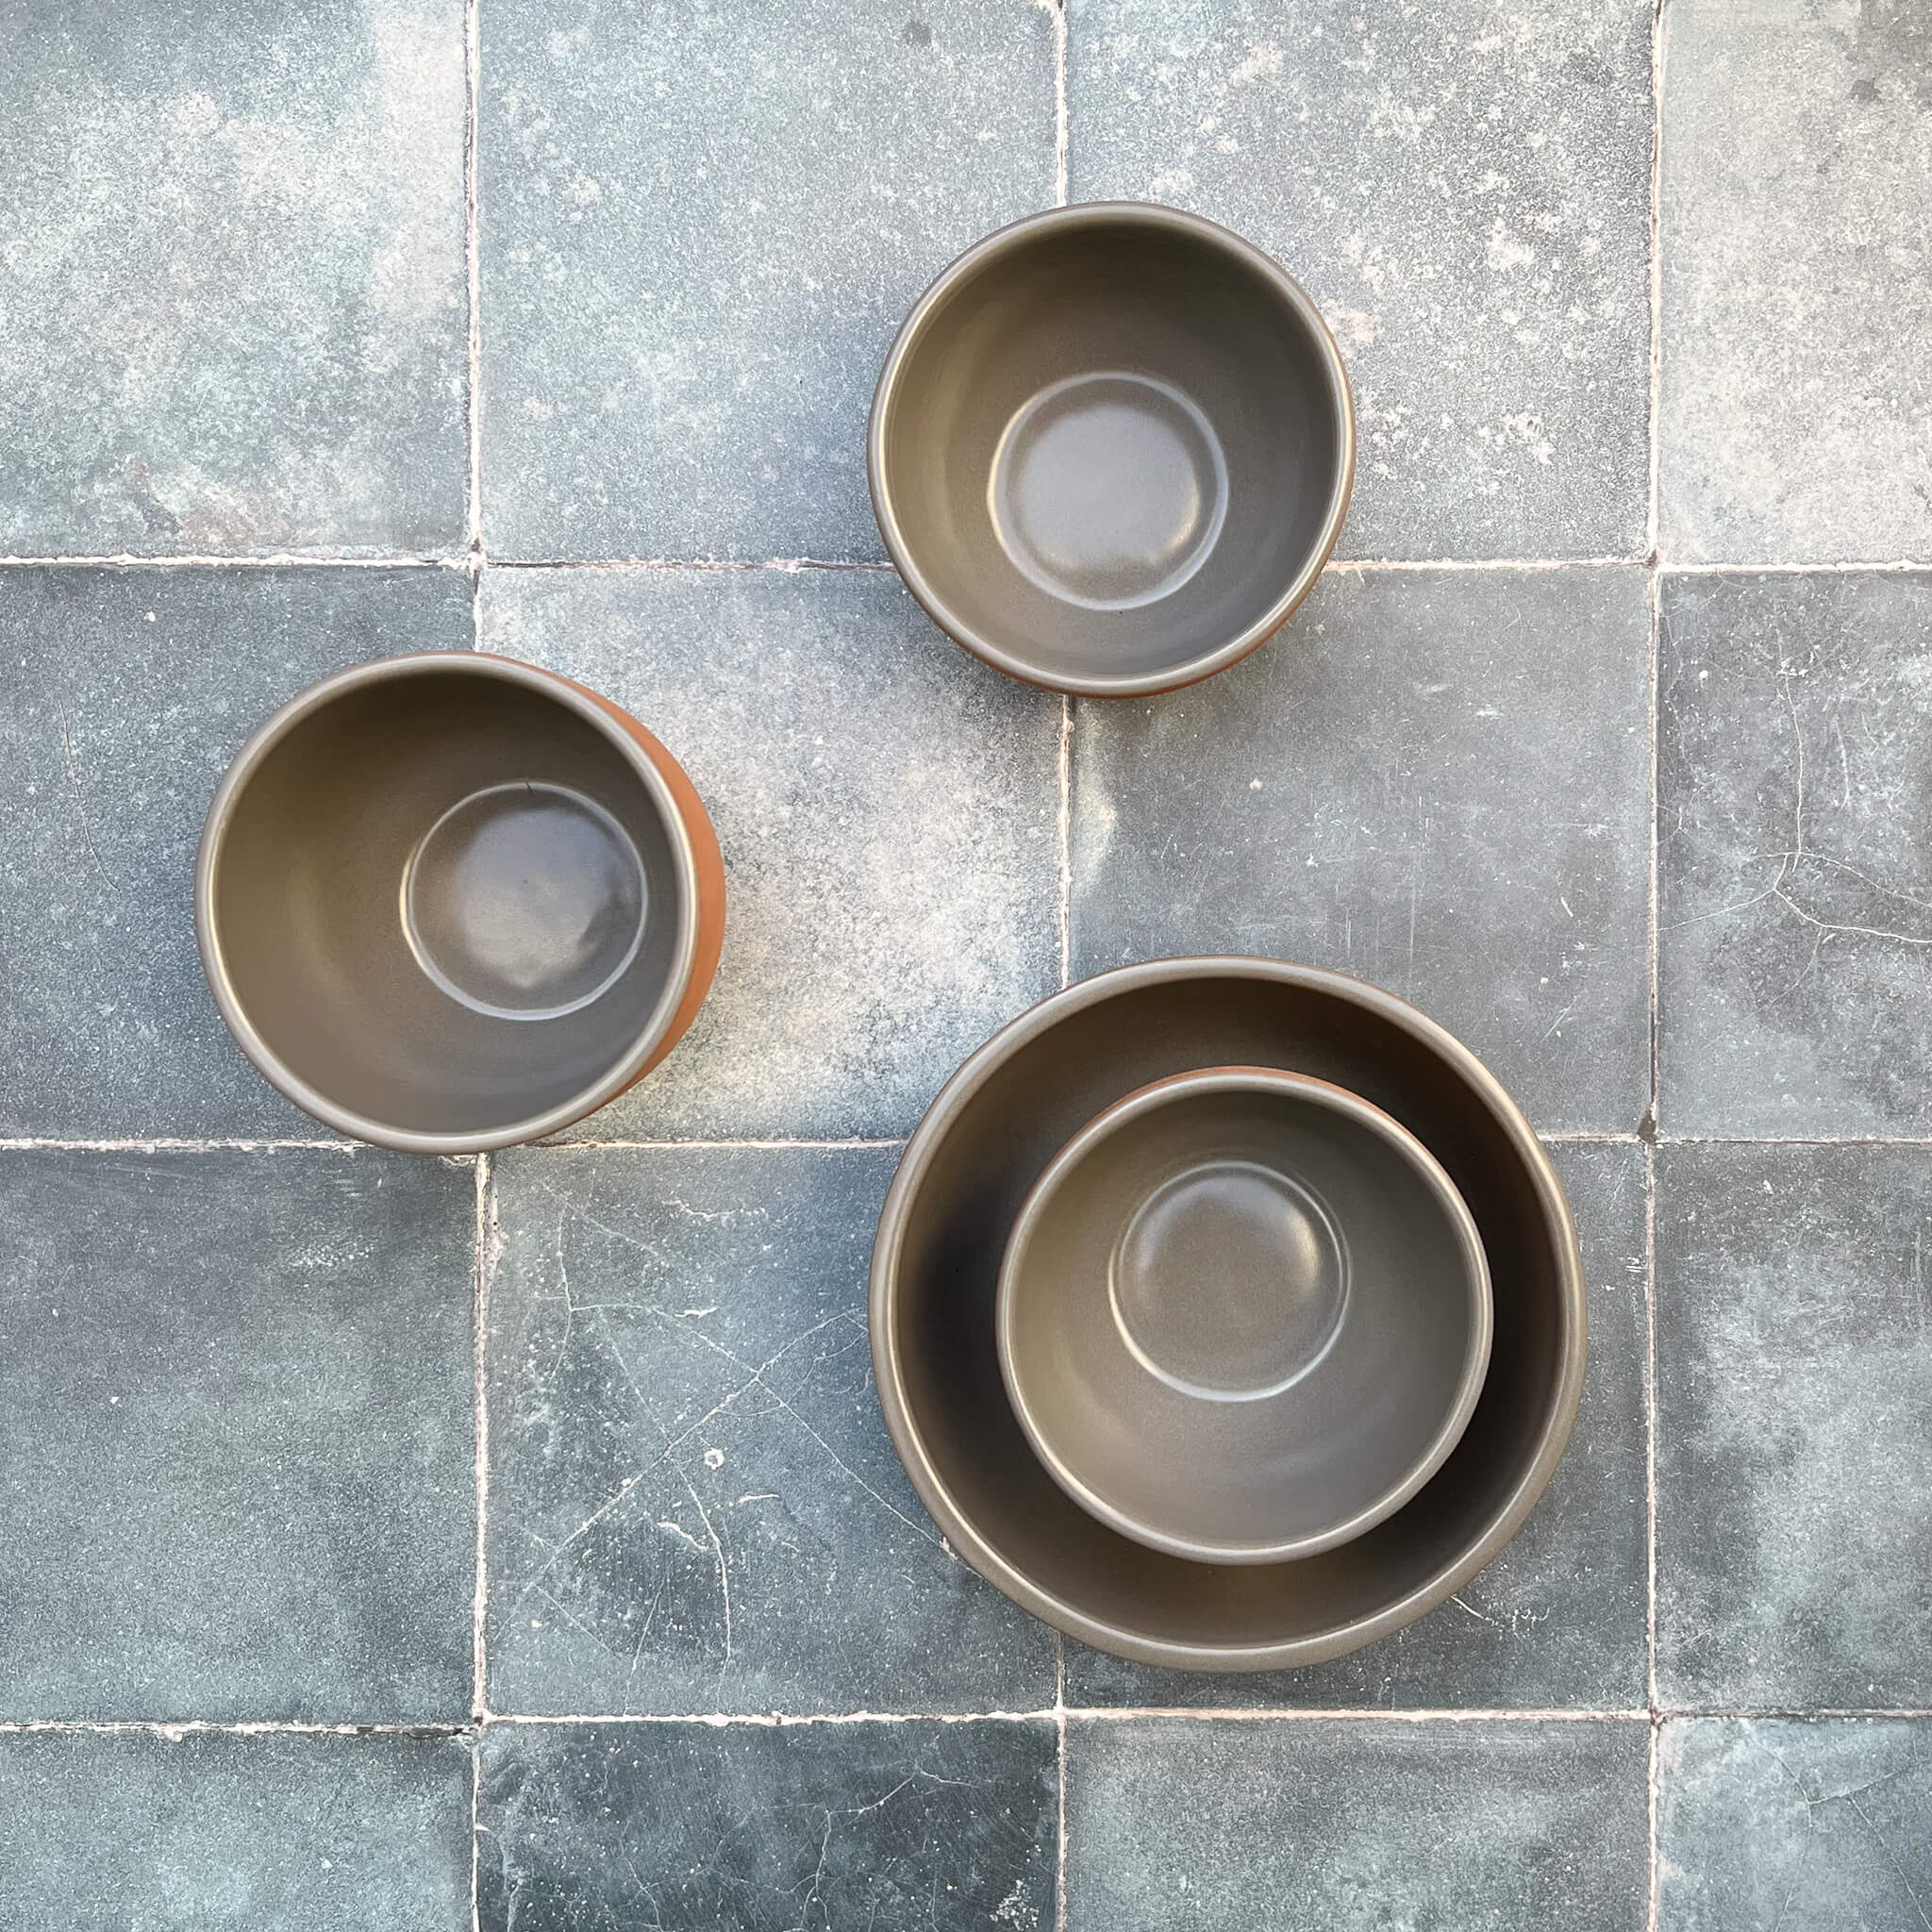 Terracotta bowls with a gray glazed interior.